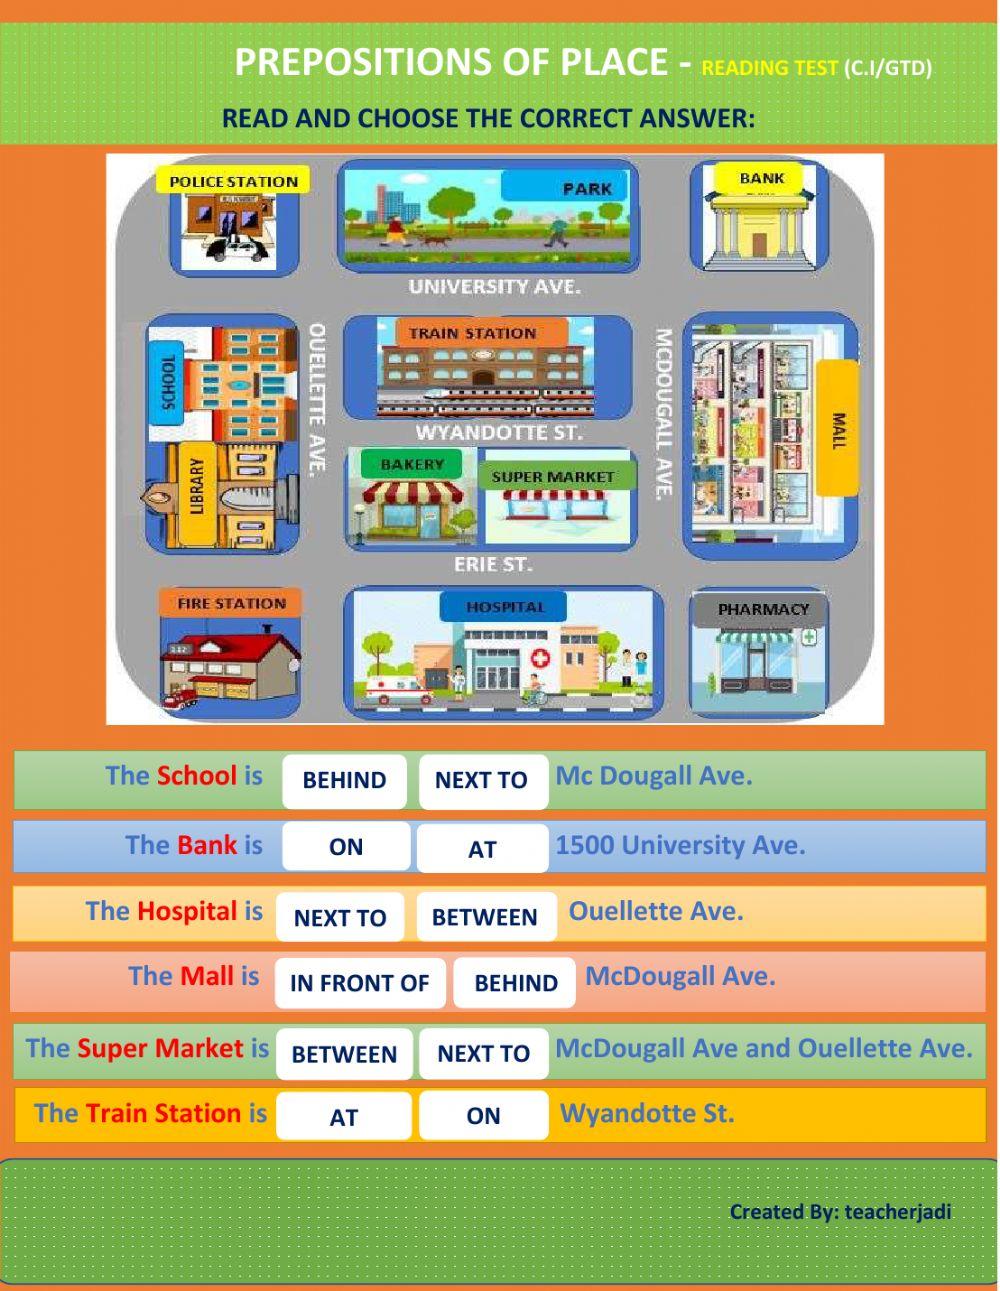 Prepositions of Place -reading test (esl)